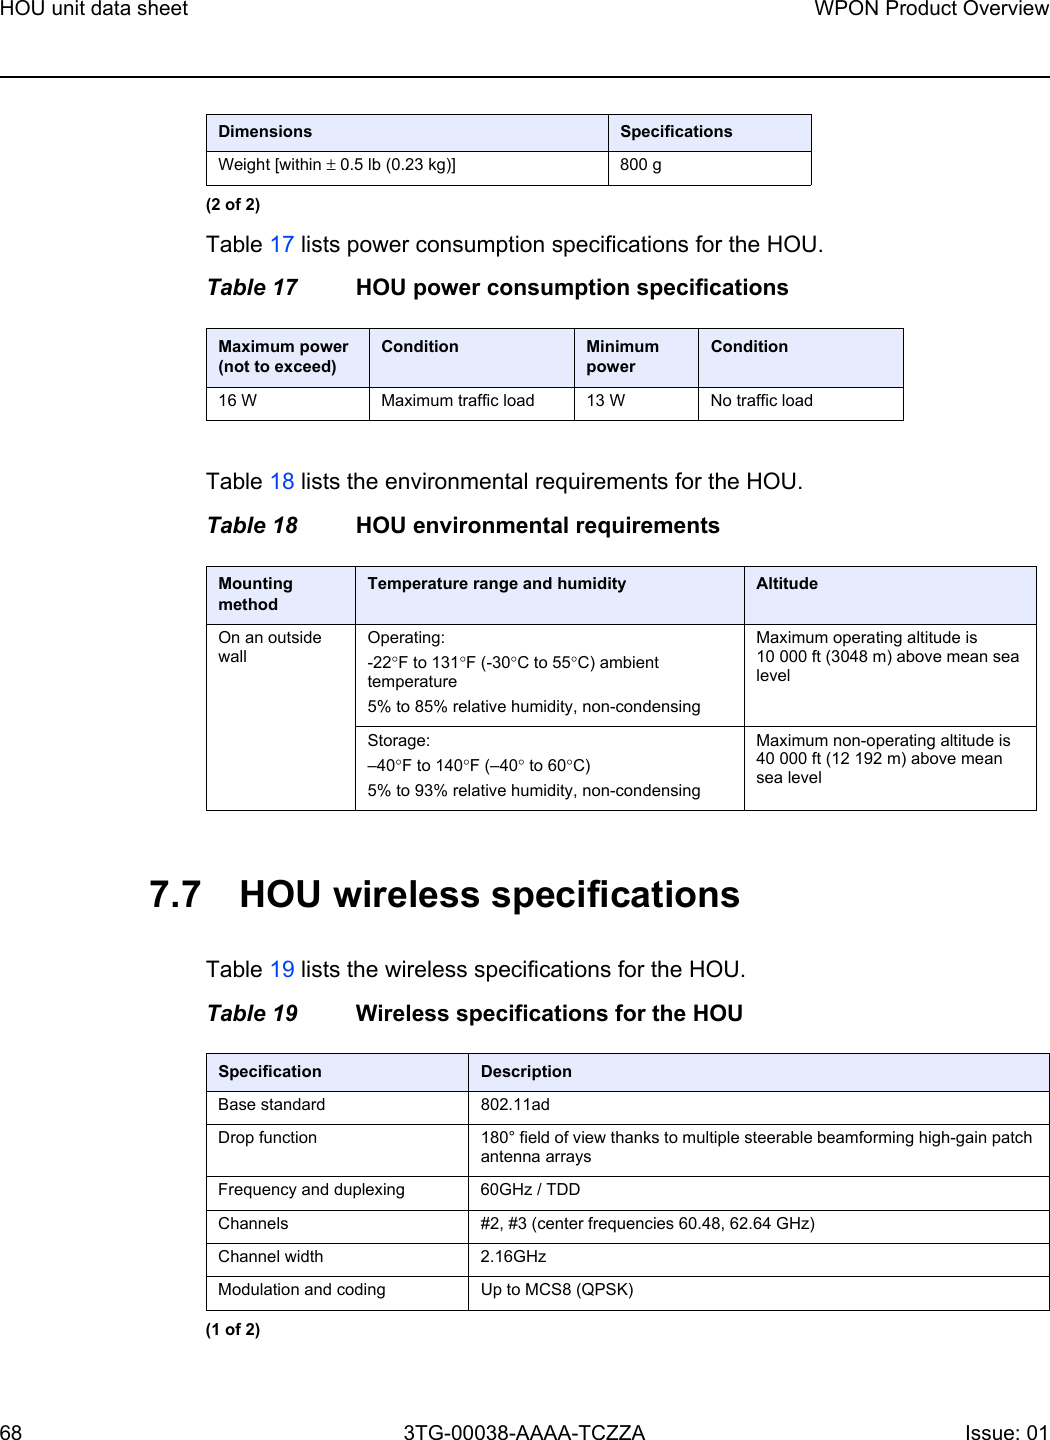 HOU unit data sheet68WPON Product Overview3TG-00038-AAAA-TCZZA Issue: 01 Table 17 lists power consumption specifications for the HOU.Table 17 HOU power consumption specificationsTable 18 lists the environmental requirements for the HOU.Table 18 HOU environmental requirements7.7 HOU wireless specificationsTable 19 lists the wireless specifications for the HOU.Table 19 Wireless specifications for the HOUWeight [within ± 0.5 lb (0.23 kg)] 800 gMaximum power (not to exceed)Condition Minimum powerCondition16 W Maximum traffic load 13 W No traffic loadMounting methodTemperature range and humidity AltitudeOn an outside wallOperating:-22°F to 131°F (-30°C to 55°C) ambient temperature5% to 85% relative humidity, non-condensingMaximum operating altitude is 10 000 ft (3048 m) above mean sea levelStorage:–40°F to 140°F (–40° to 60°C) 5% to 93% relative humidity, non-condensingMaximum non-operating altitude is 40 000 ft (12 192 m) above mean sea level Dimensions Specifications(2 of 2)Specification DescriptionBase standard 802.11adDrop function 180° field of view thanks to multiple steerable beamforming high-gain patch antenna arraysFrequency and duplexing 60GHz / TDDChannels #2, #3 (center frequencies 60.48, 62.64 GHz) Channel width 2.16GHzModulation and coding Up to MCS8 (QPSK)(1 of 2)